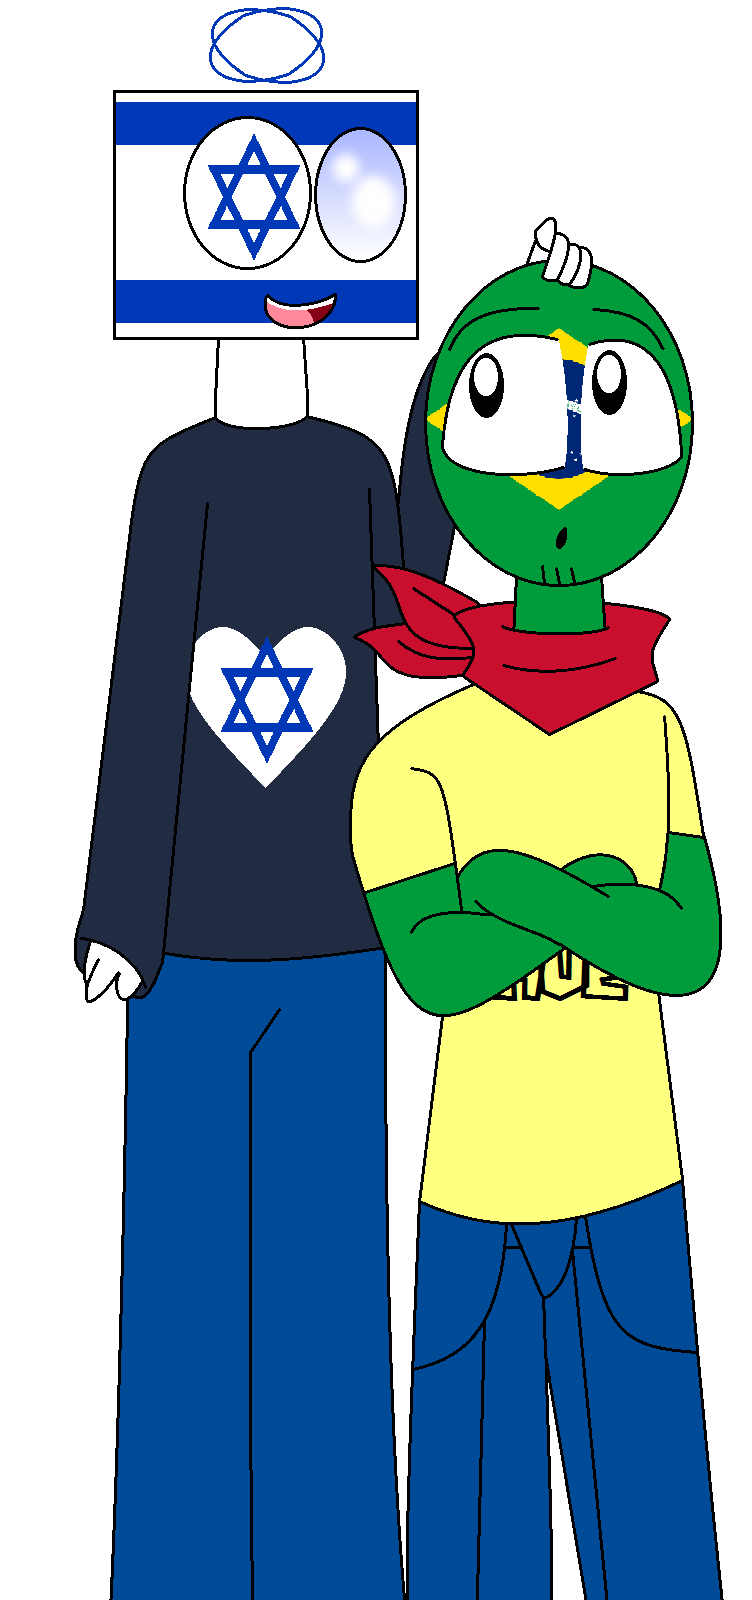 Brazil And Israel Countryhumans by lino284 on DeviantArt